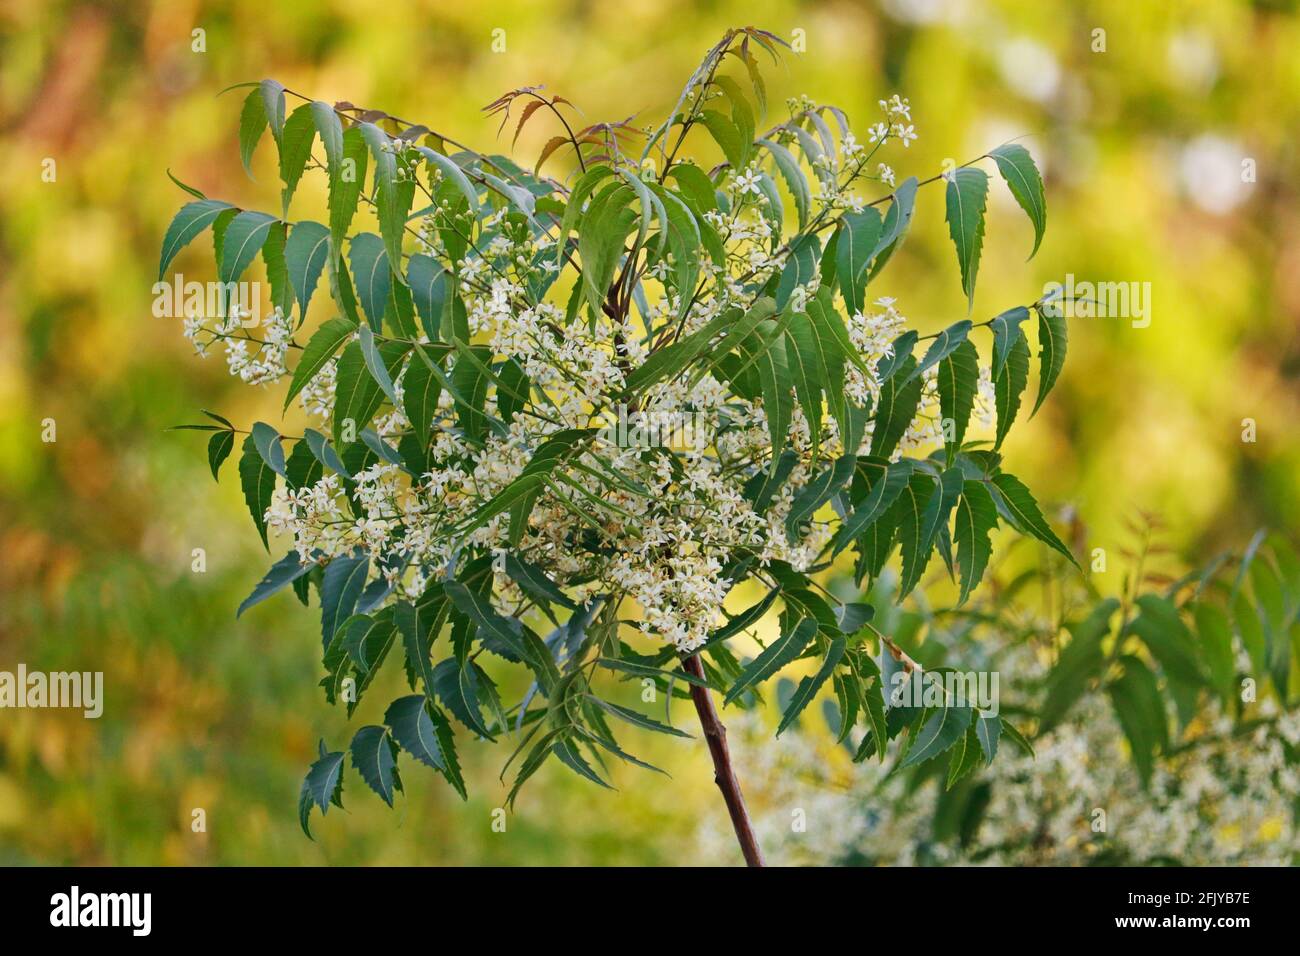 Azadirachta indica, commonly known as neem, nimtree or Indian lilac with flowers Stock Photo